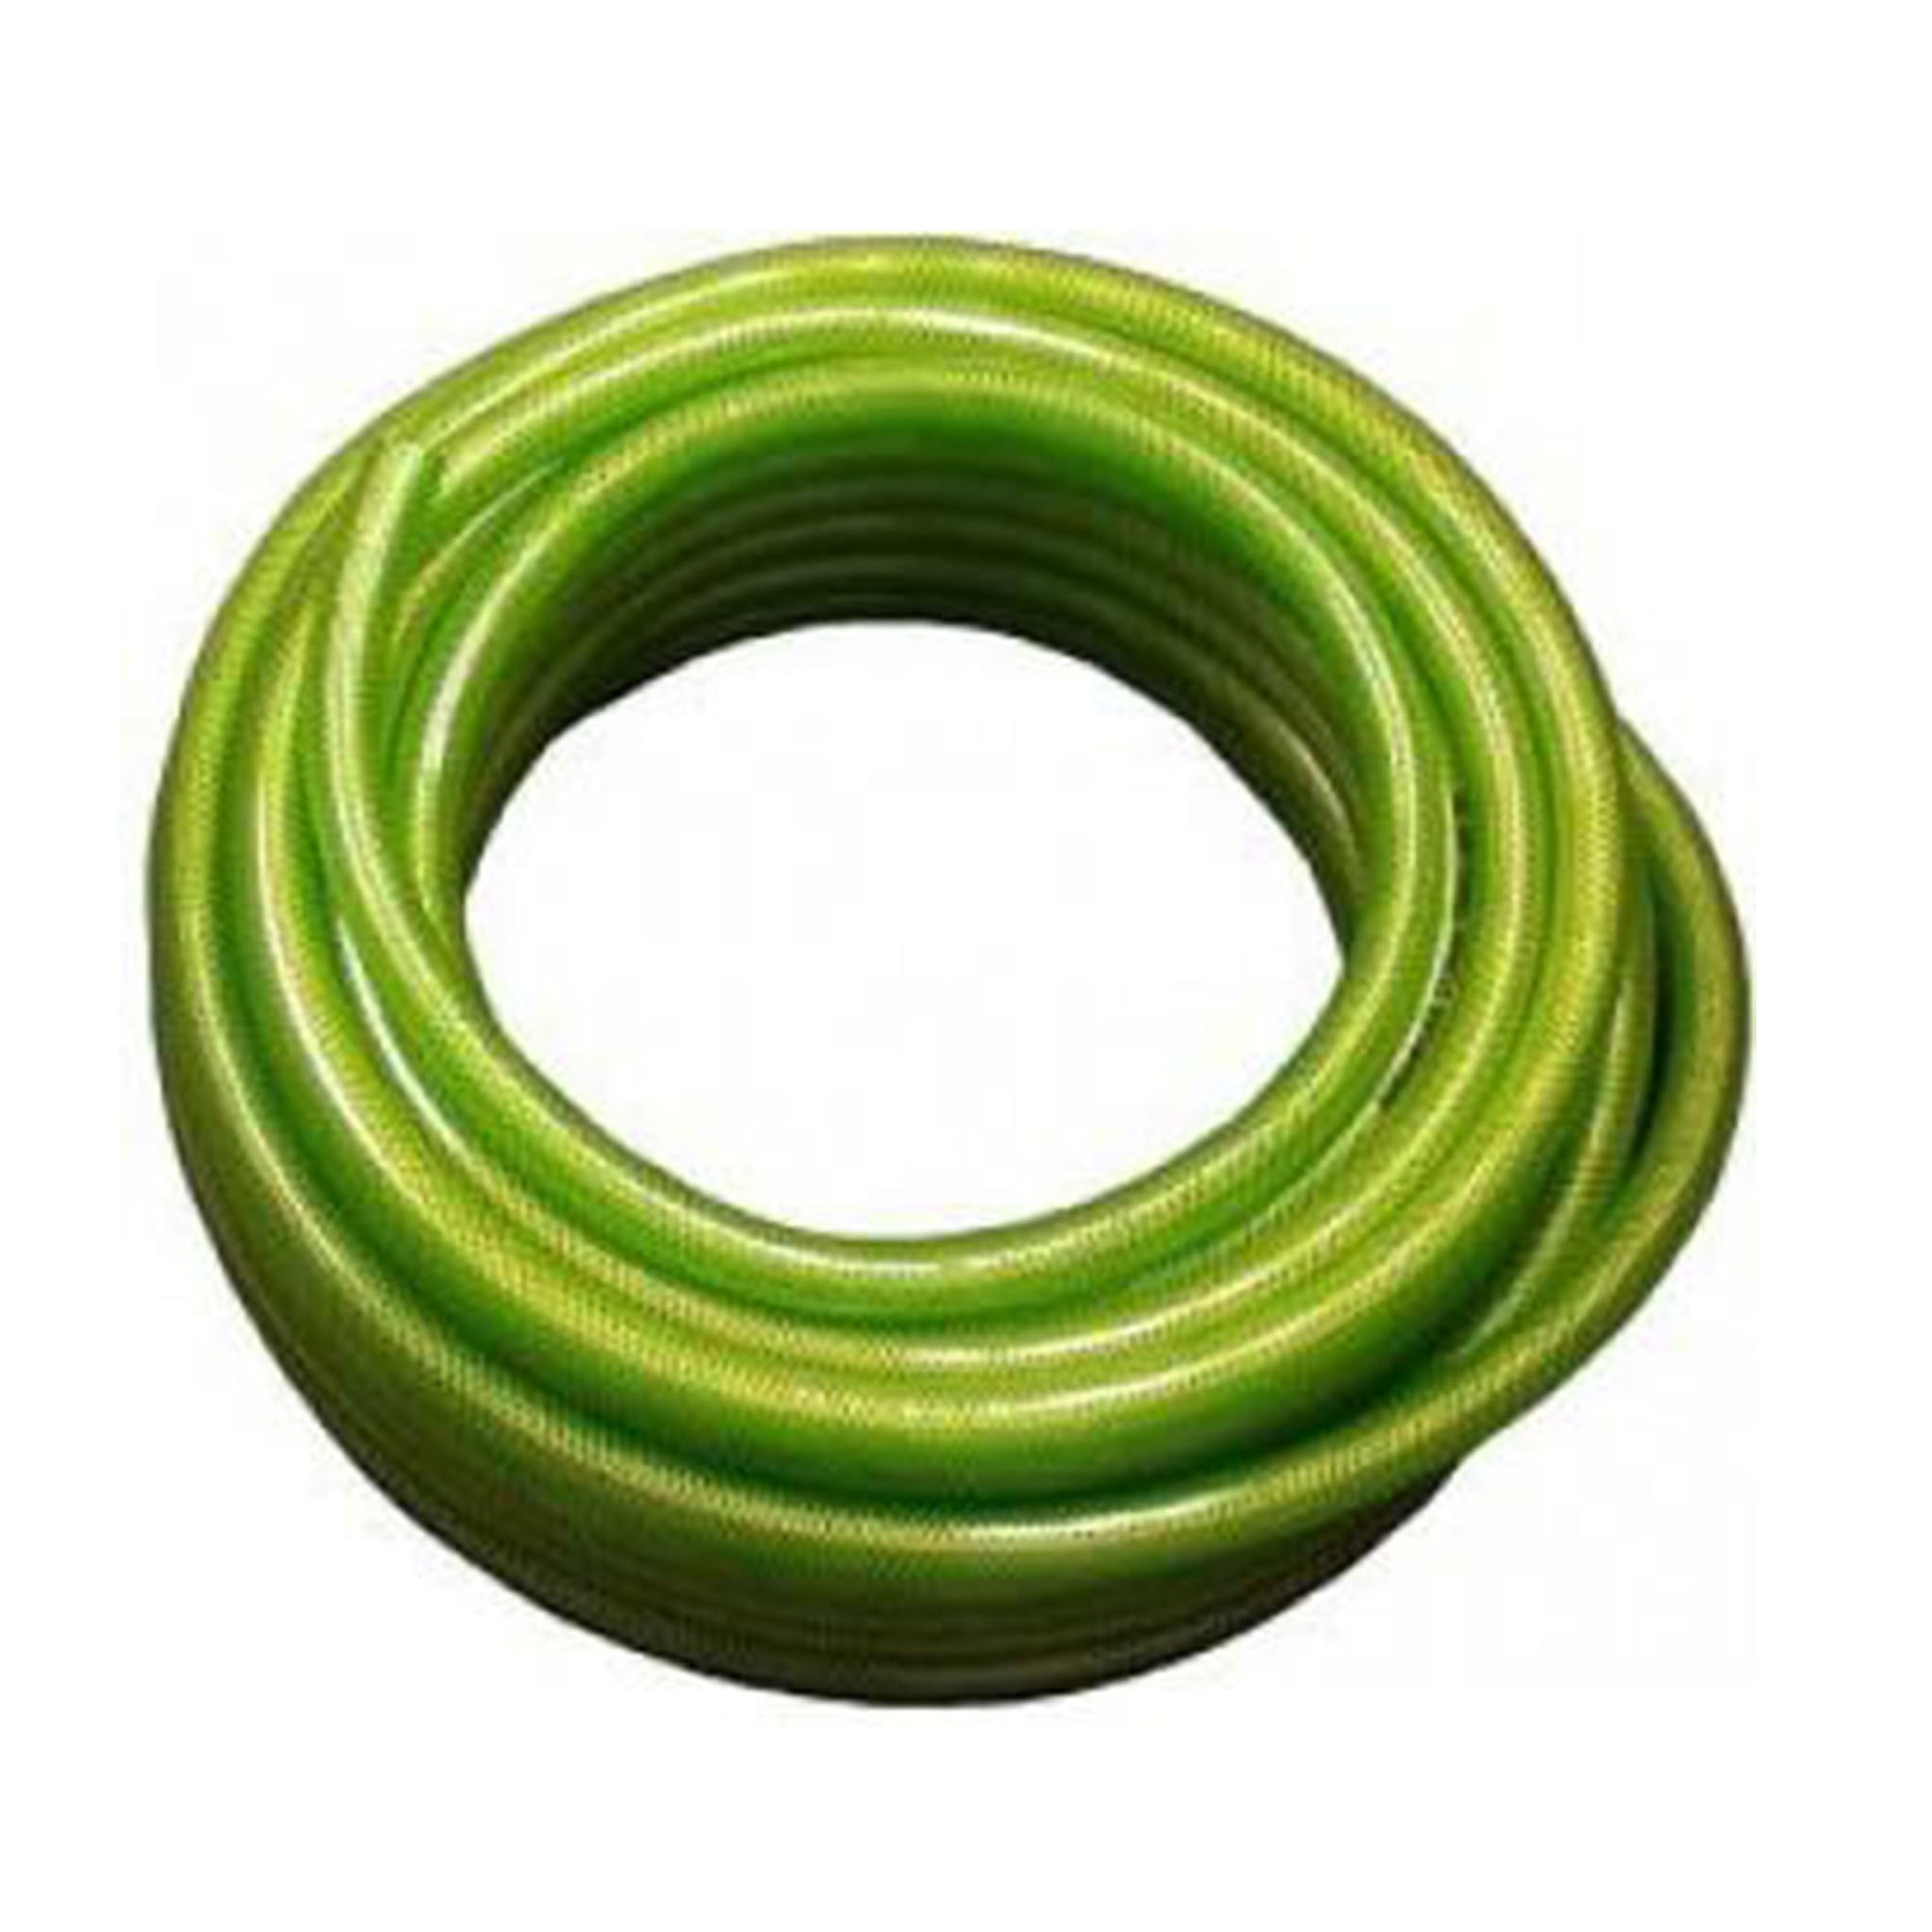 3/4" Greenflex Water Supply Hose Available in 2 Lengths